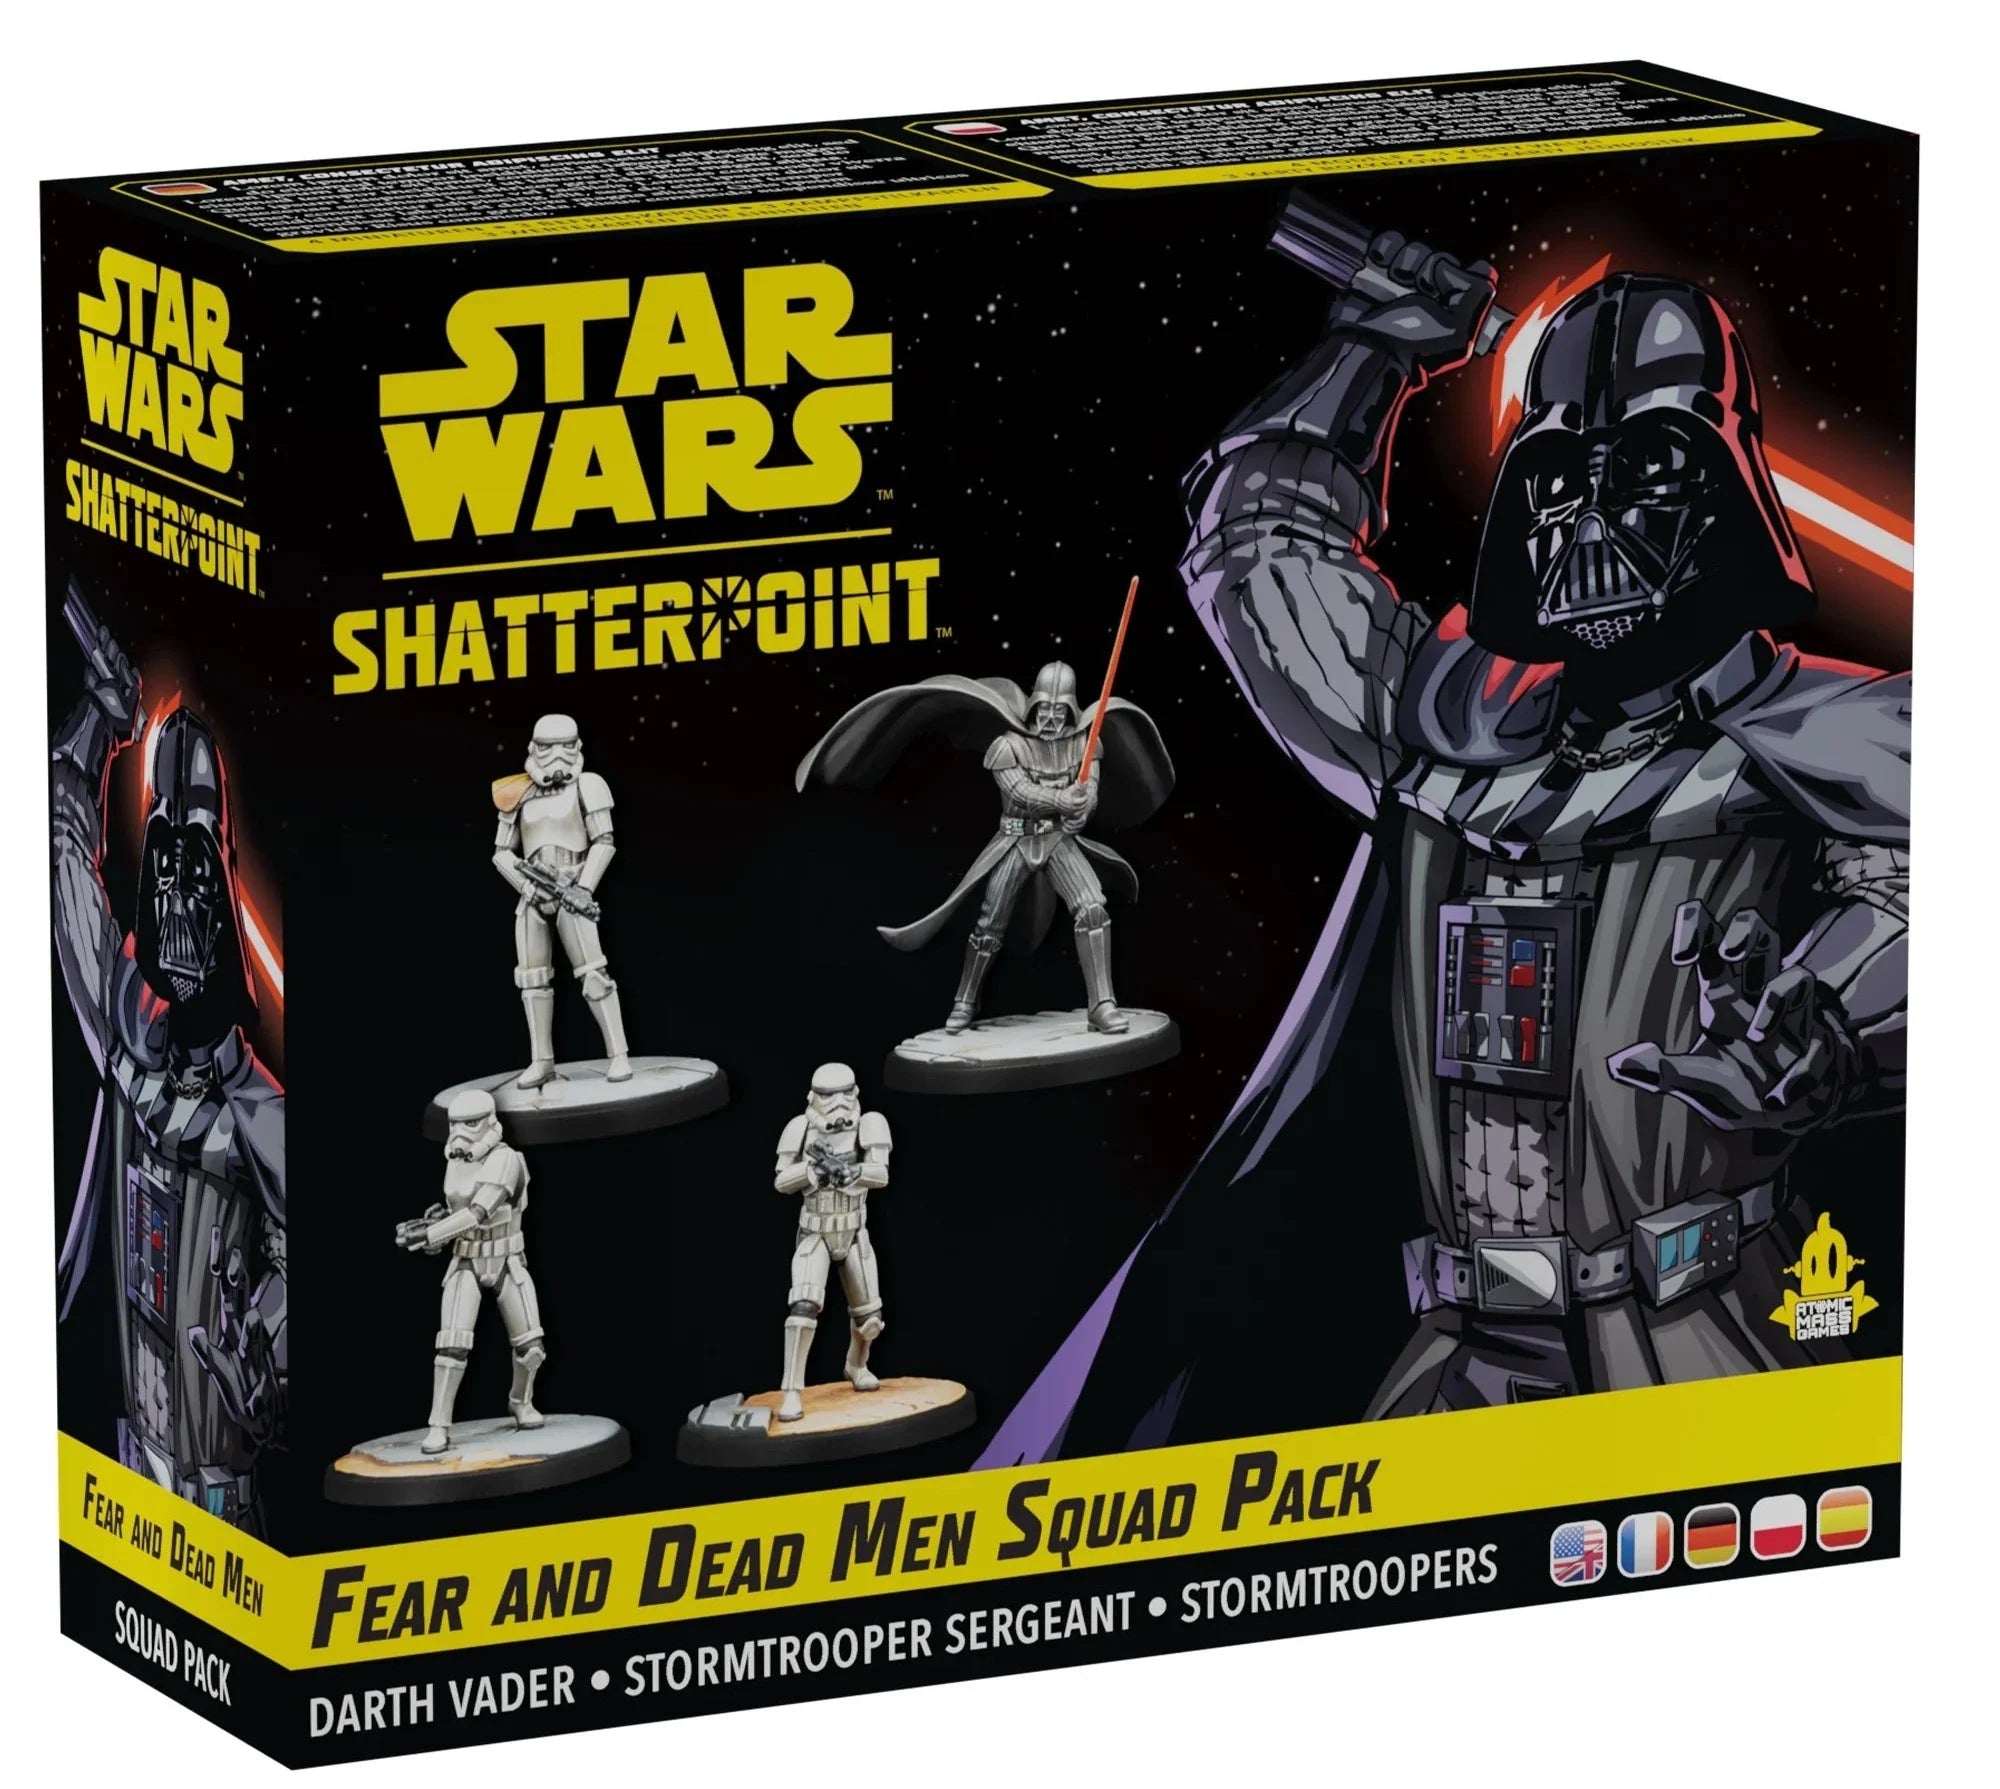 Star Wars Shatterpoint: Fear and dead men Squad pack | Multizone: Comics And Games